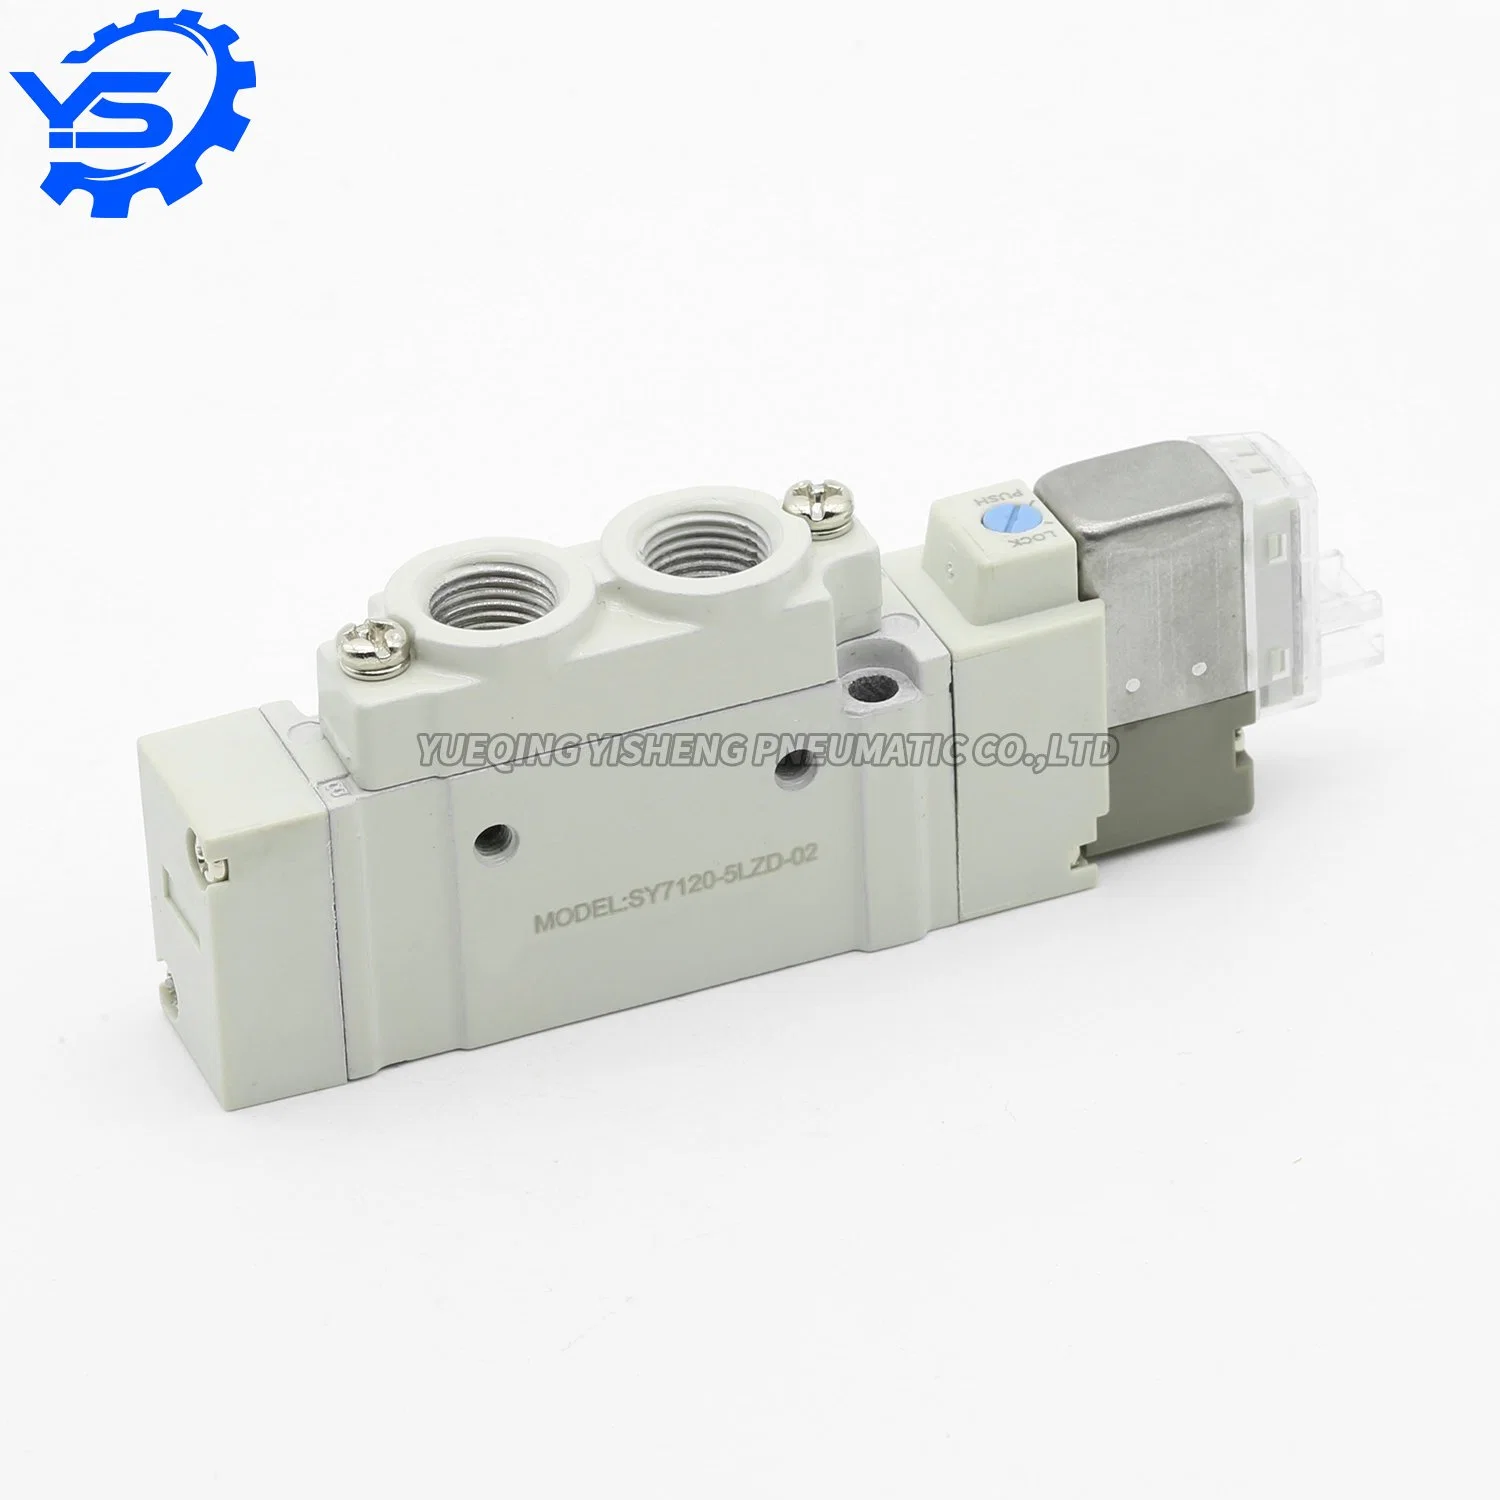 Sy7120-5lzd-02 SMC Type Air Controller Valve Aluminum Alloy Pneumatic Solenoid Valve with DC24V Single Coil